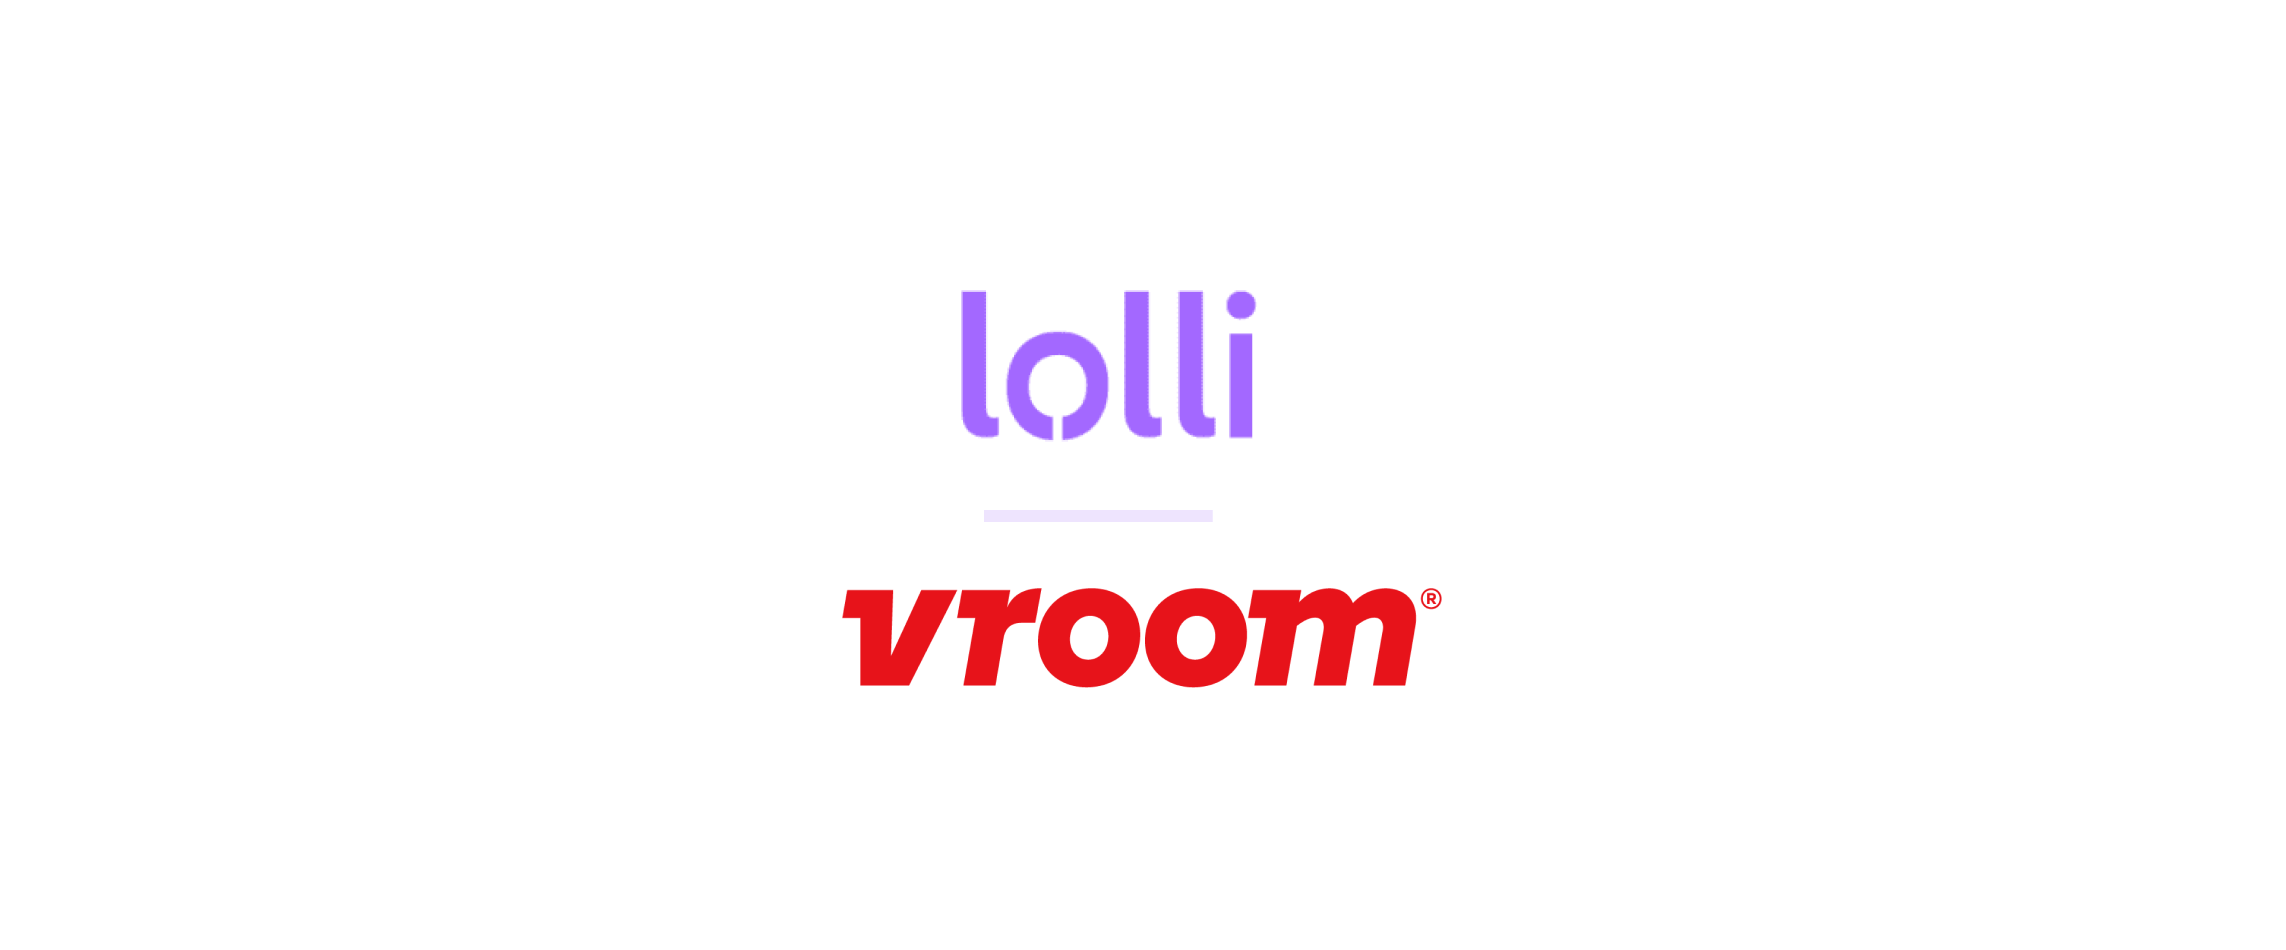 Earn Bitcoin With Lolli When You Sell Your Car Using Vroom! 🚗